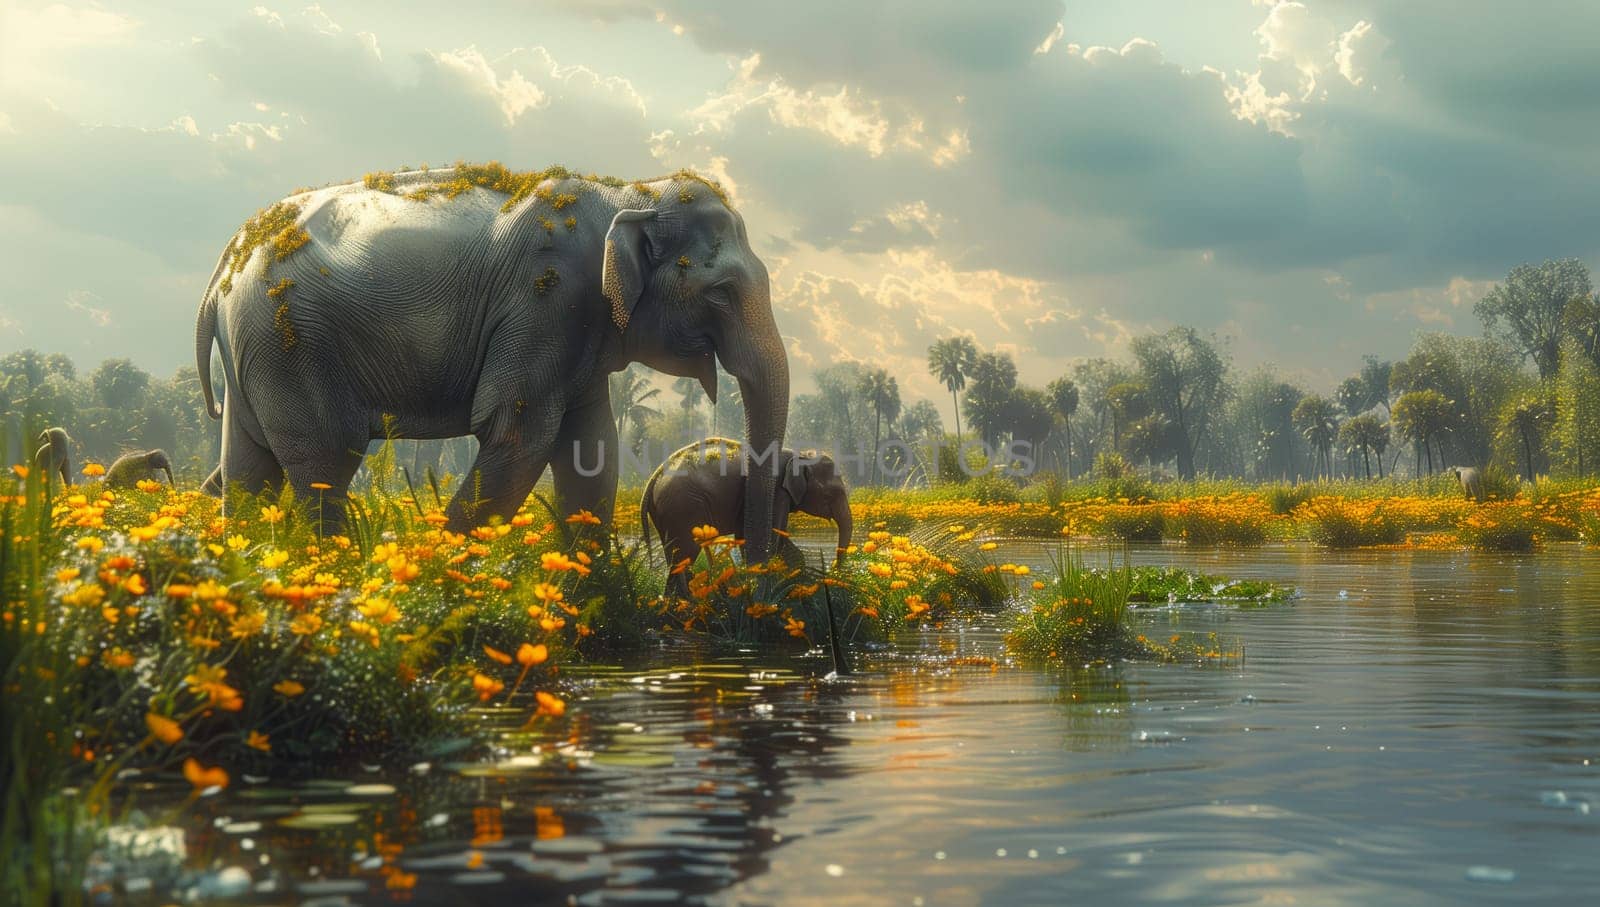 Two majestic elephants stand beside a tranquil lake, surrounded by lush green plants and towering trees. The sky is dotted with fluffy clouds, creating a serene natural landscape